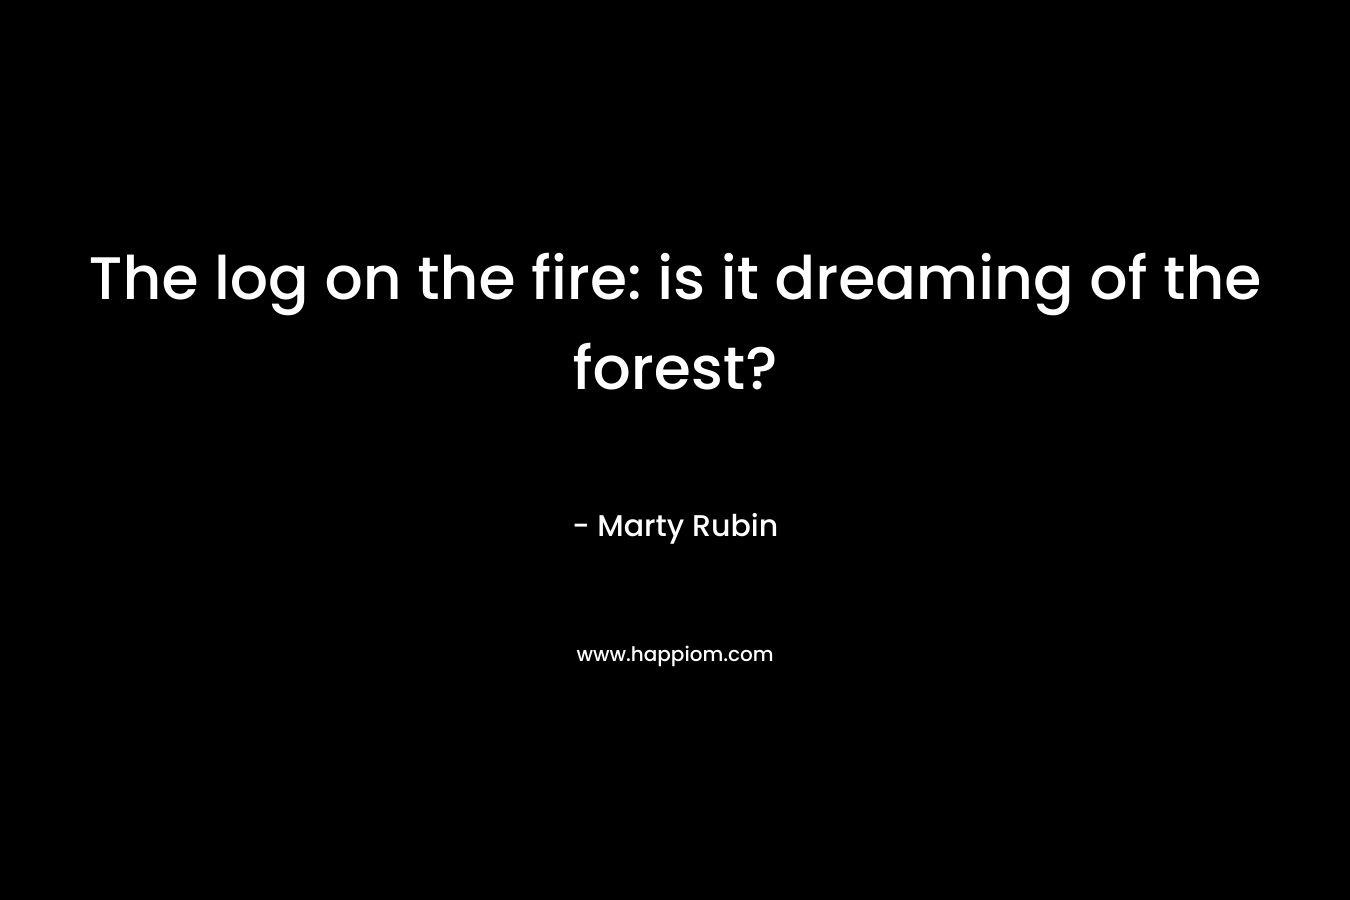 The log on the fire: is it dreaming of the forest?